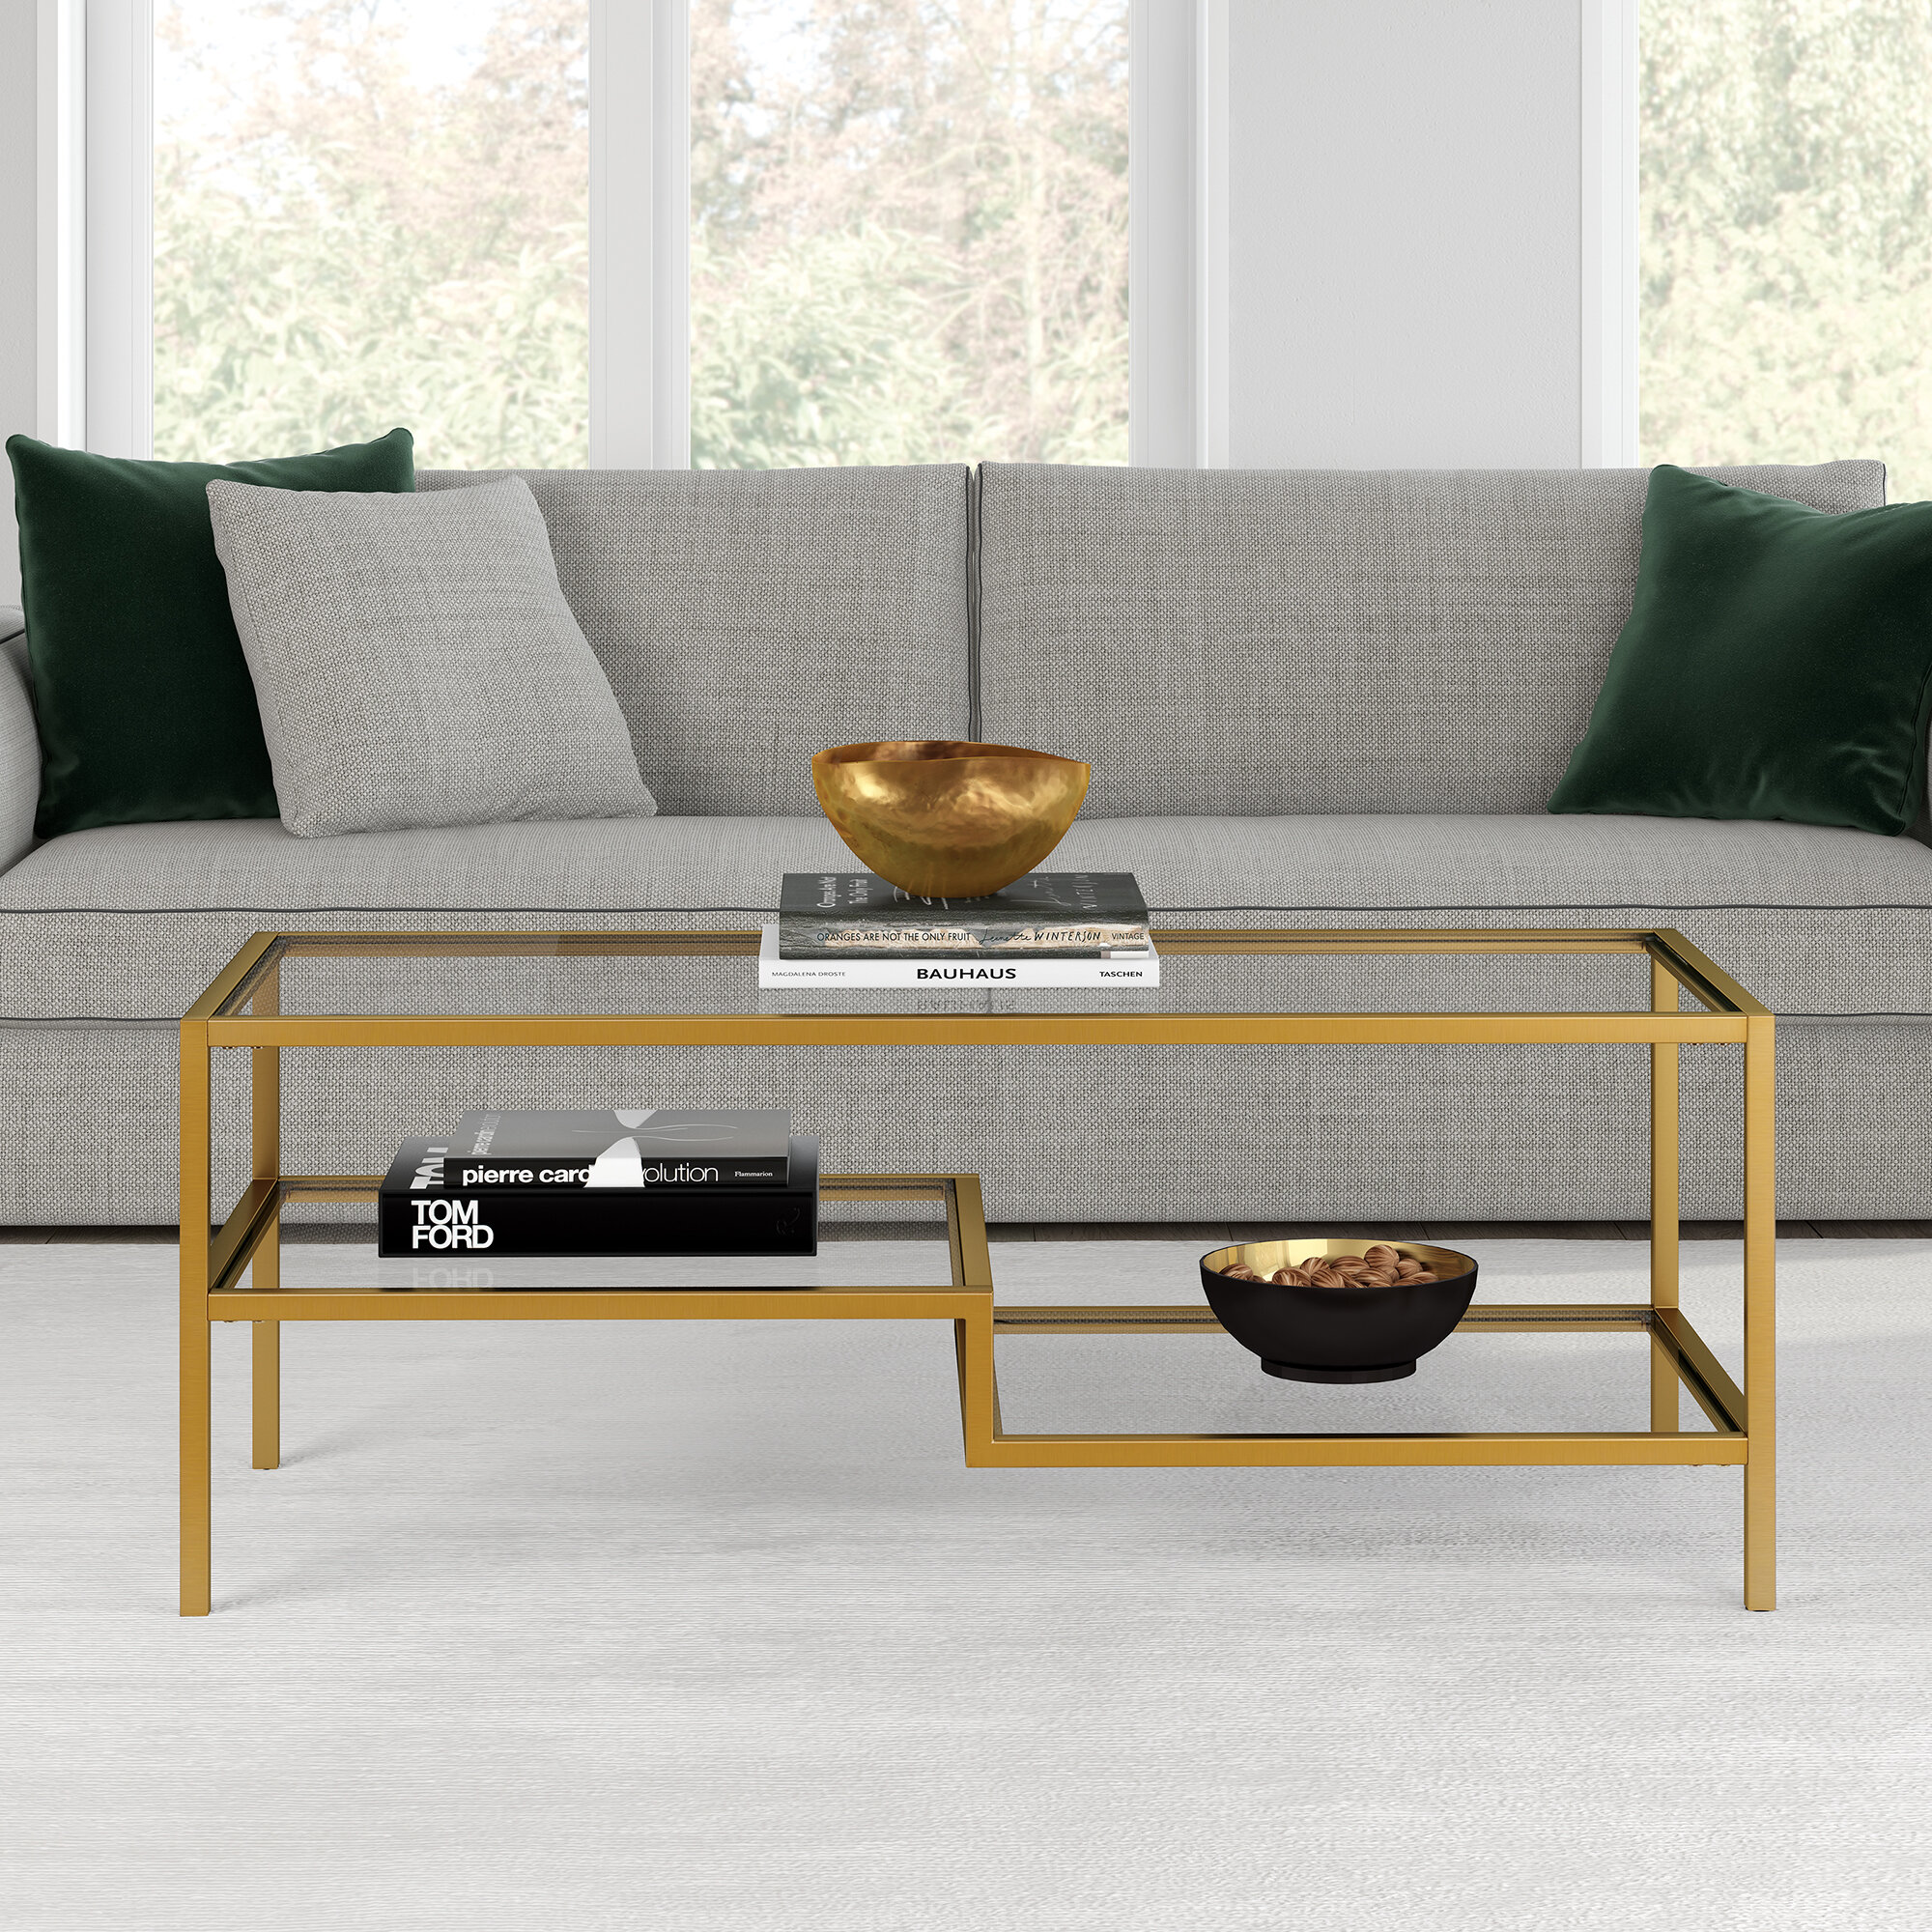 4 Legs Coffee Table with Storage